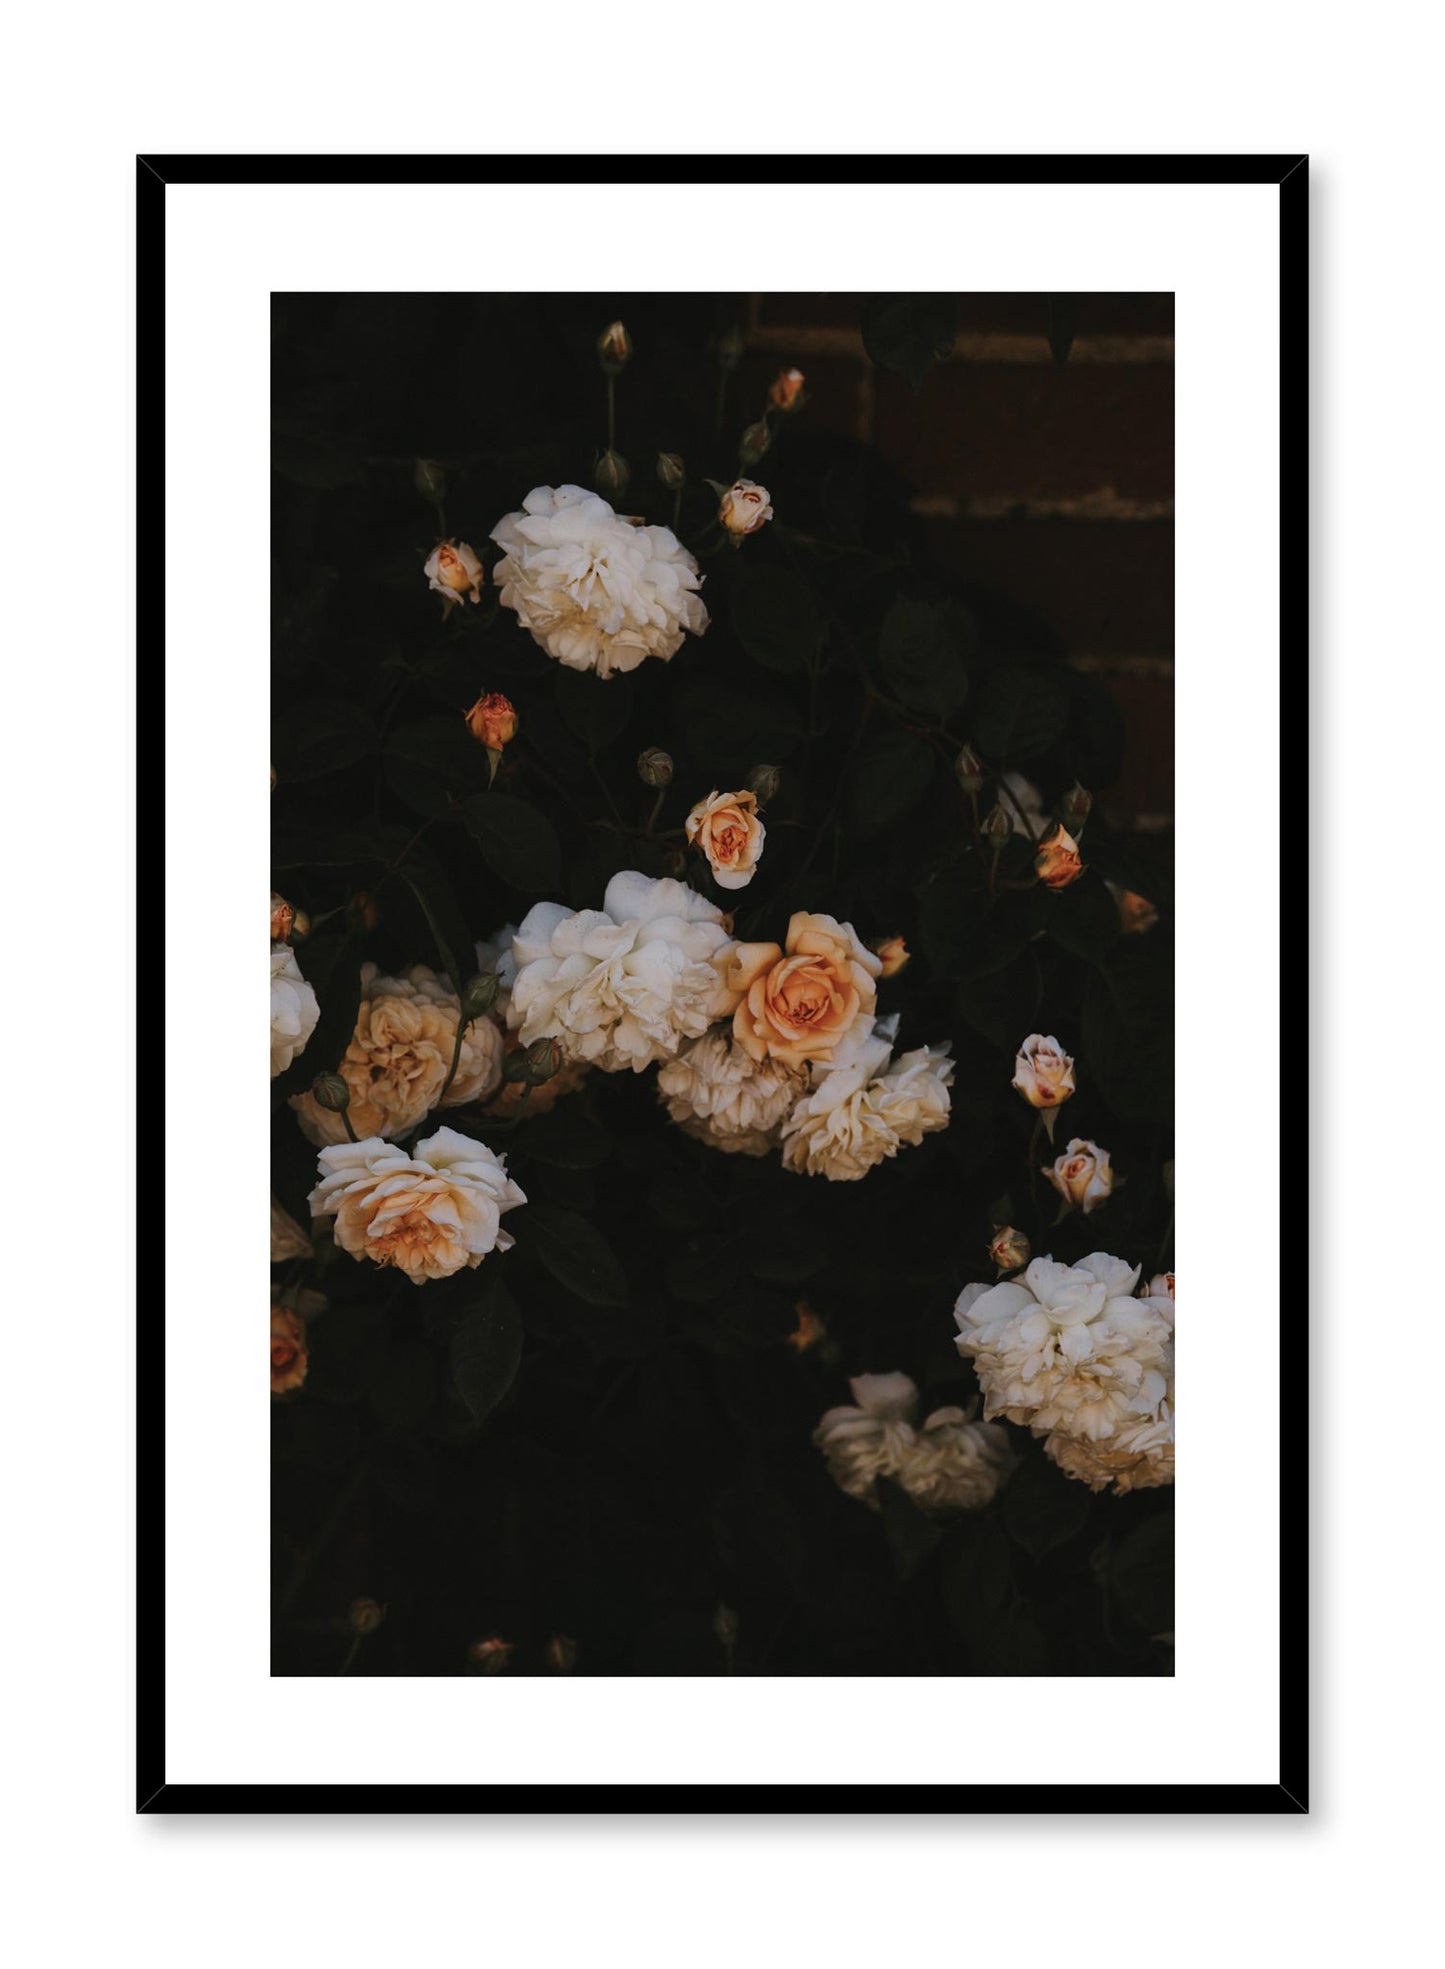 Minimalist design poster by Opposite Wall with bricks and blooms floral photography